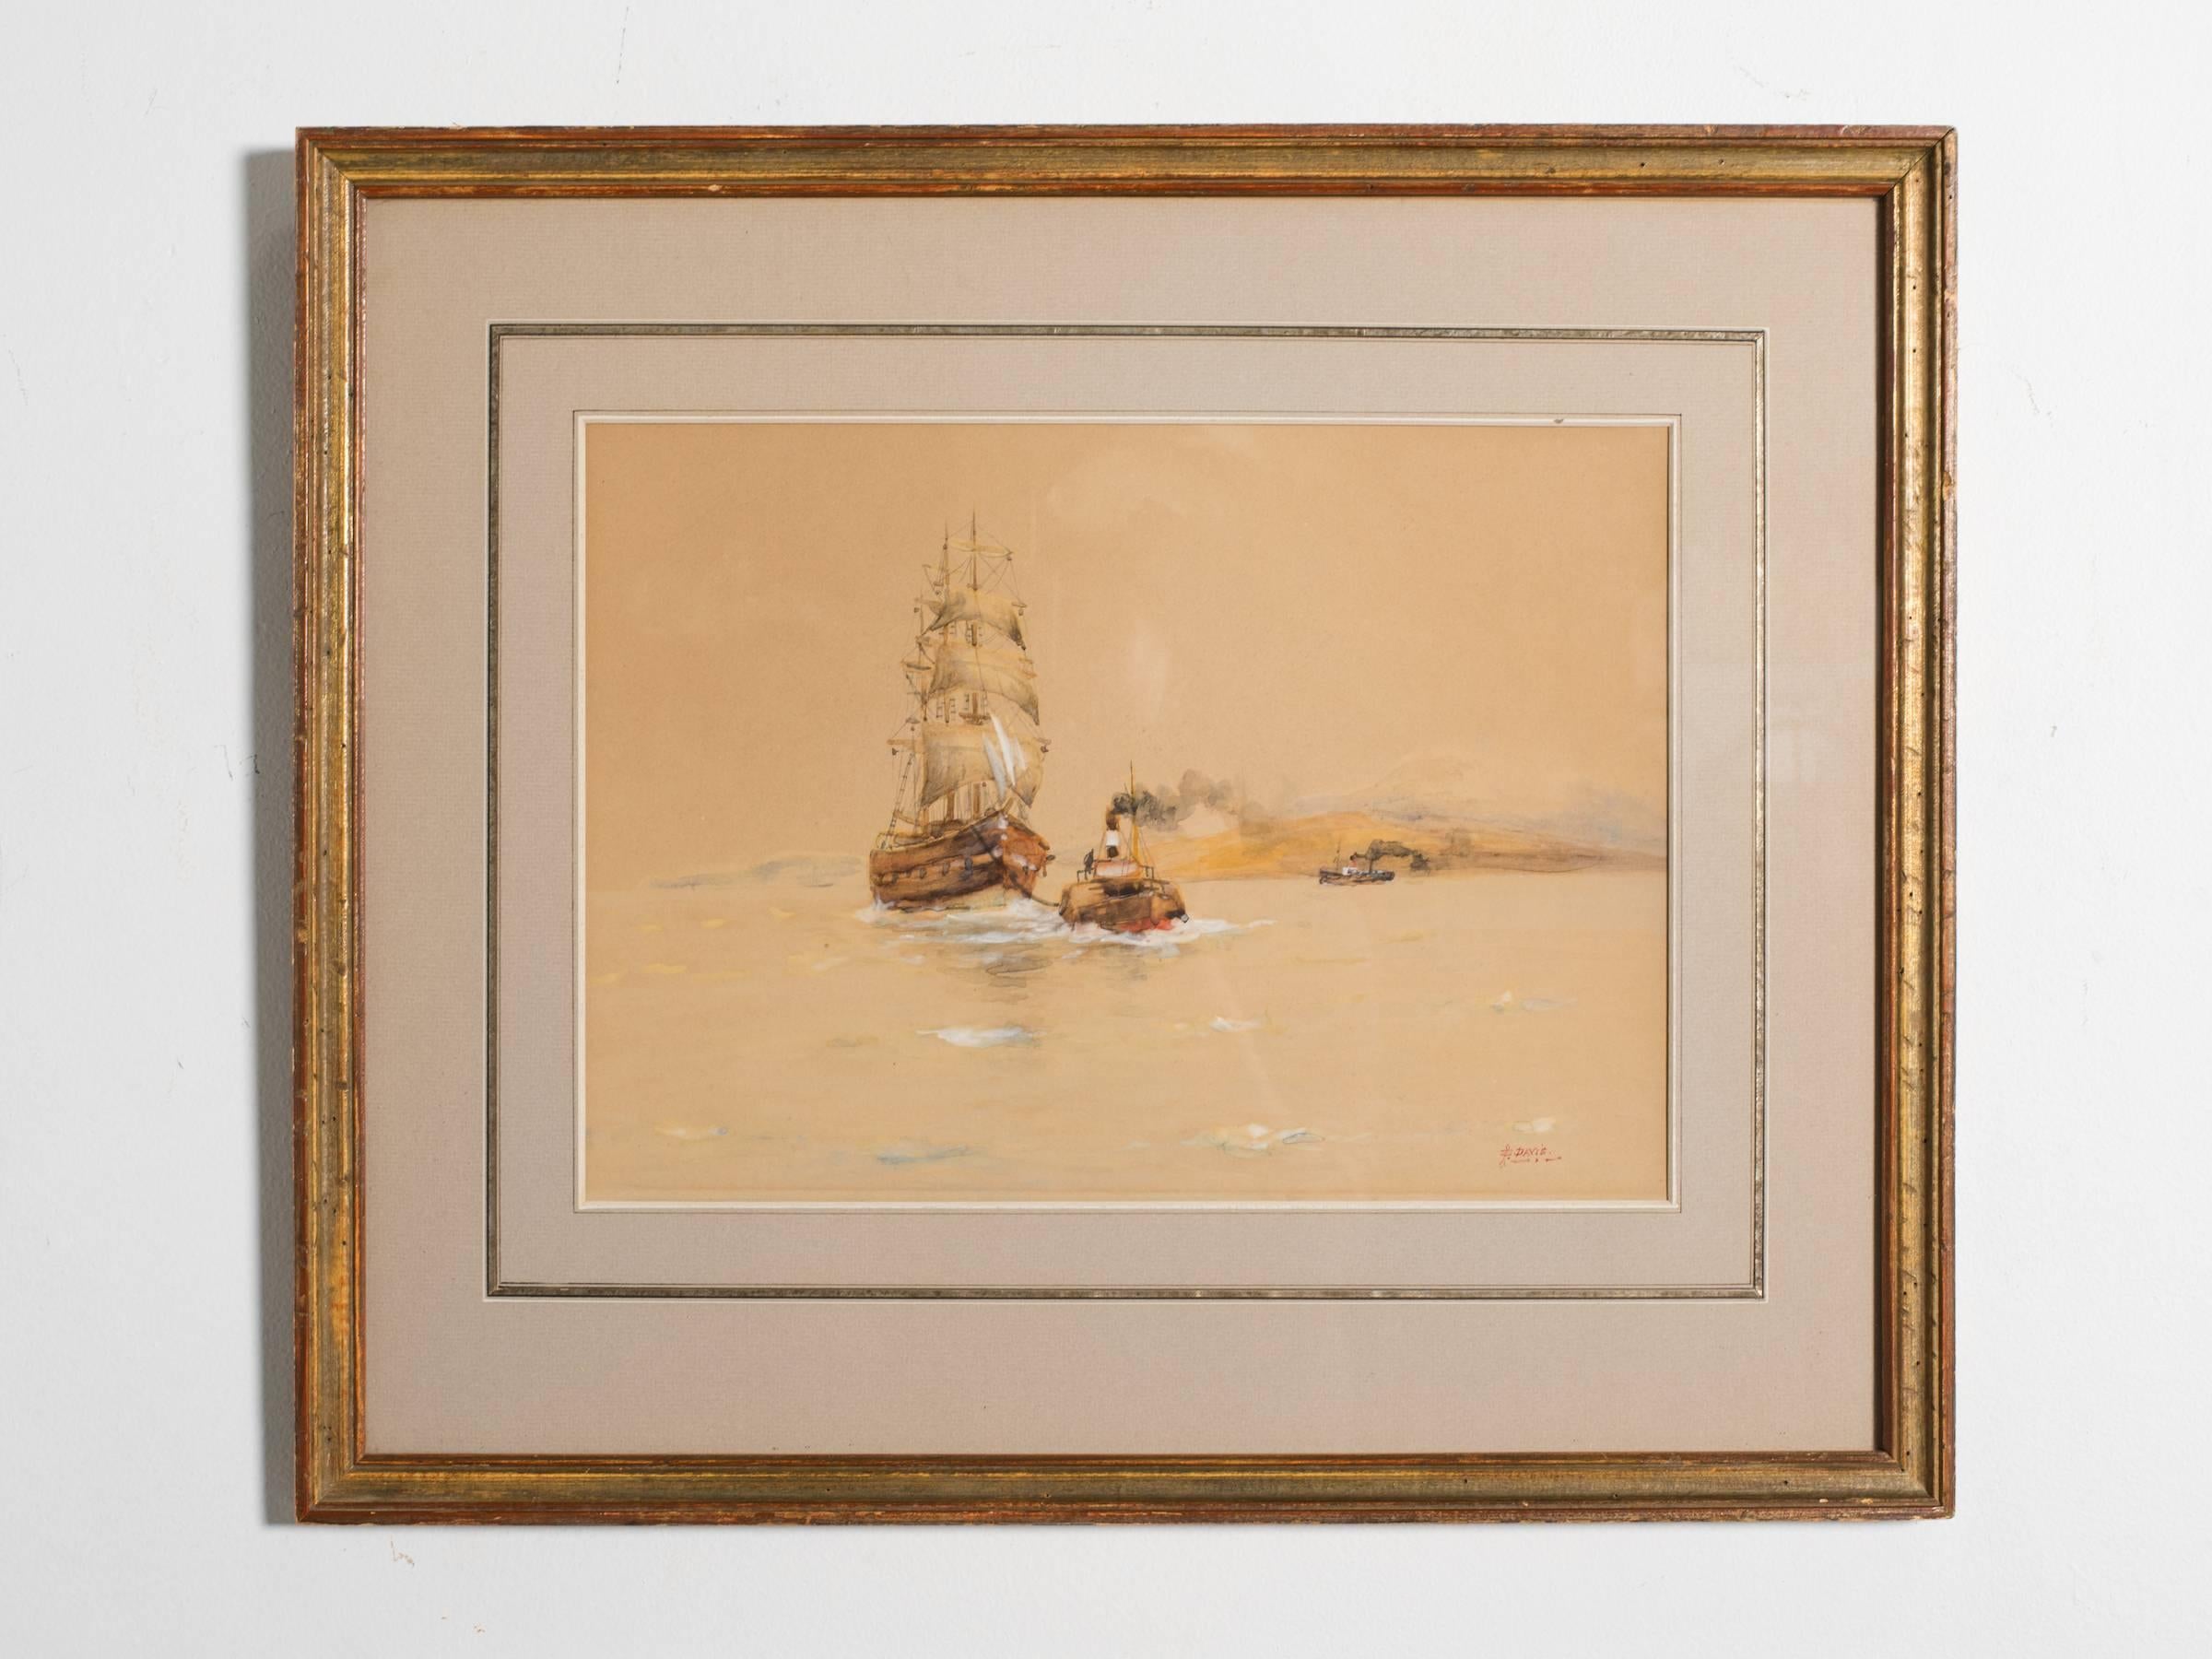 Pair of turn of the century watercolors signed Davis of tall ships.